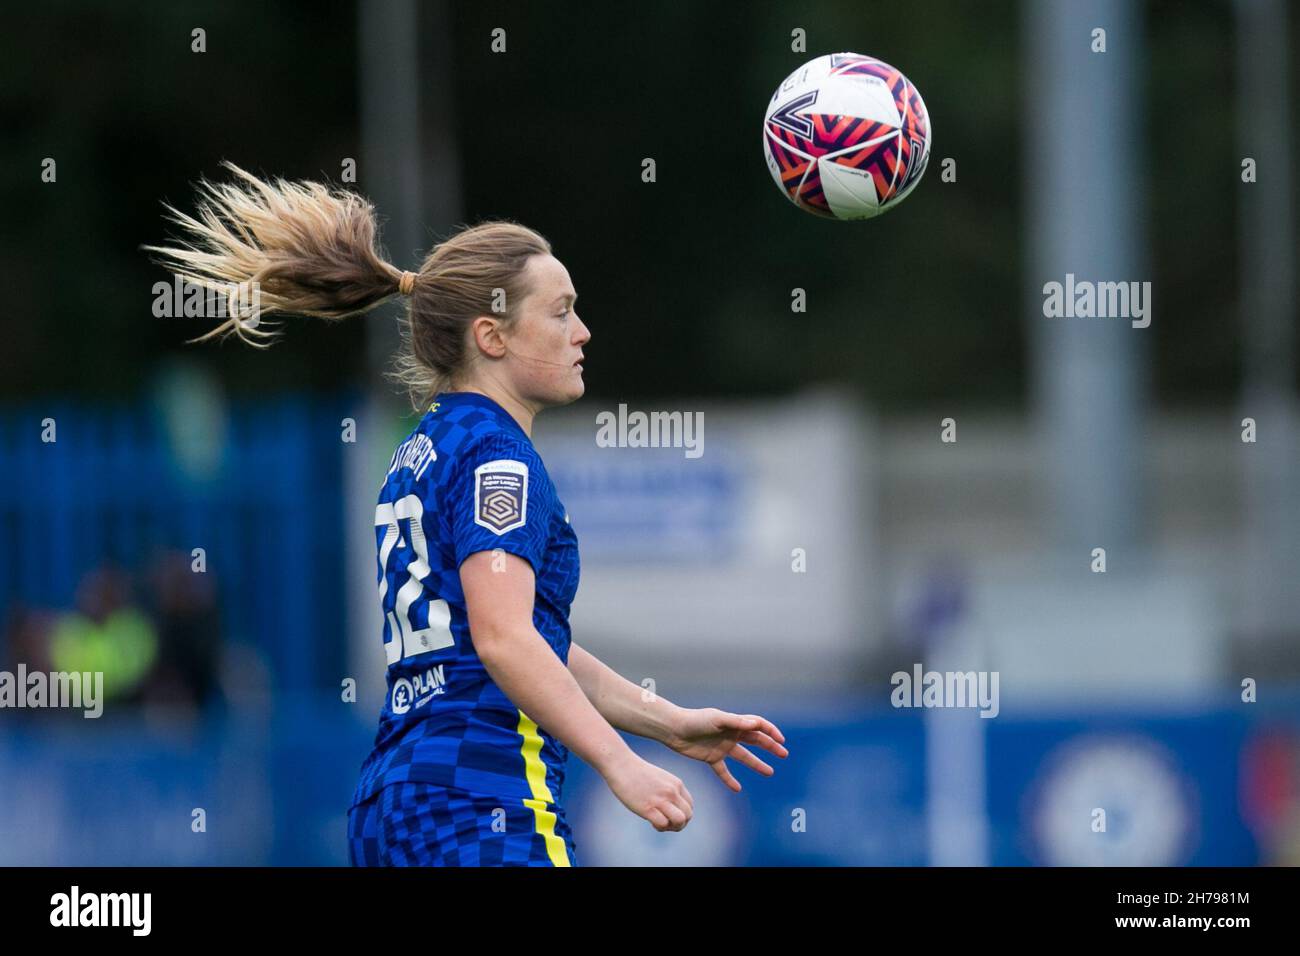 London, UK. 21st Nov, 2021. LONDON, UK. NOVEMBER 21ST : Erin Cuthbert of Chelsea FC controls the ball during the 2021-22 FA Womens Superleague fixture between Chelsea FC and Birmingham City at Kingsmeadow. Credit: Federico Guerra Morán/Alamy Live News Stock Photo